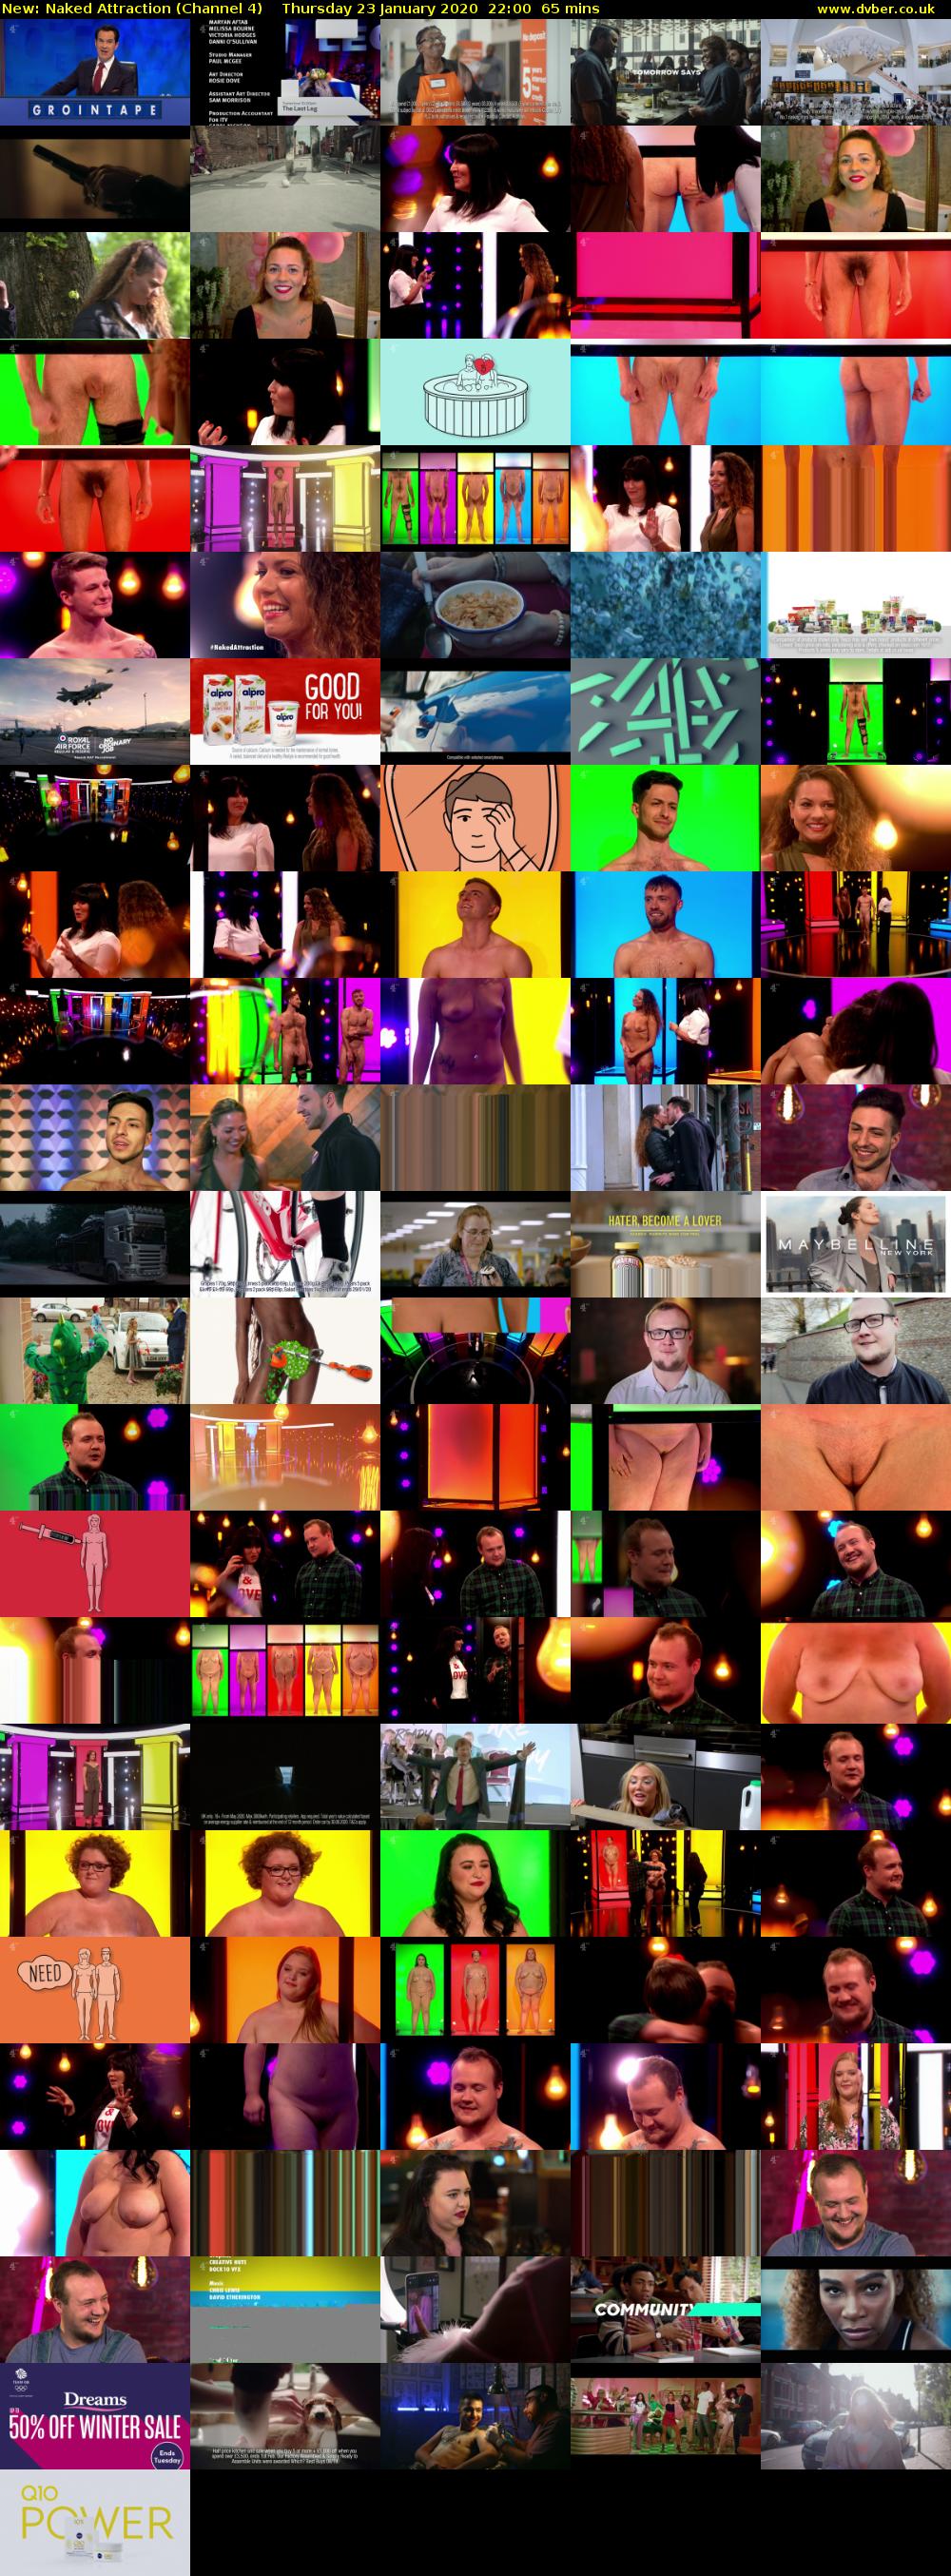 Naked Attraction (Channel 4) Thursday 23 January 2020 22:00 - 23:05